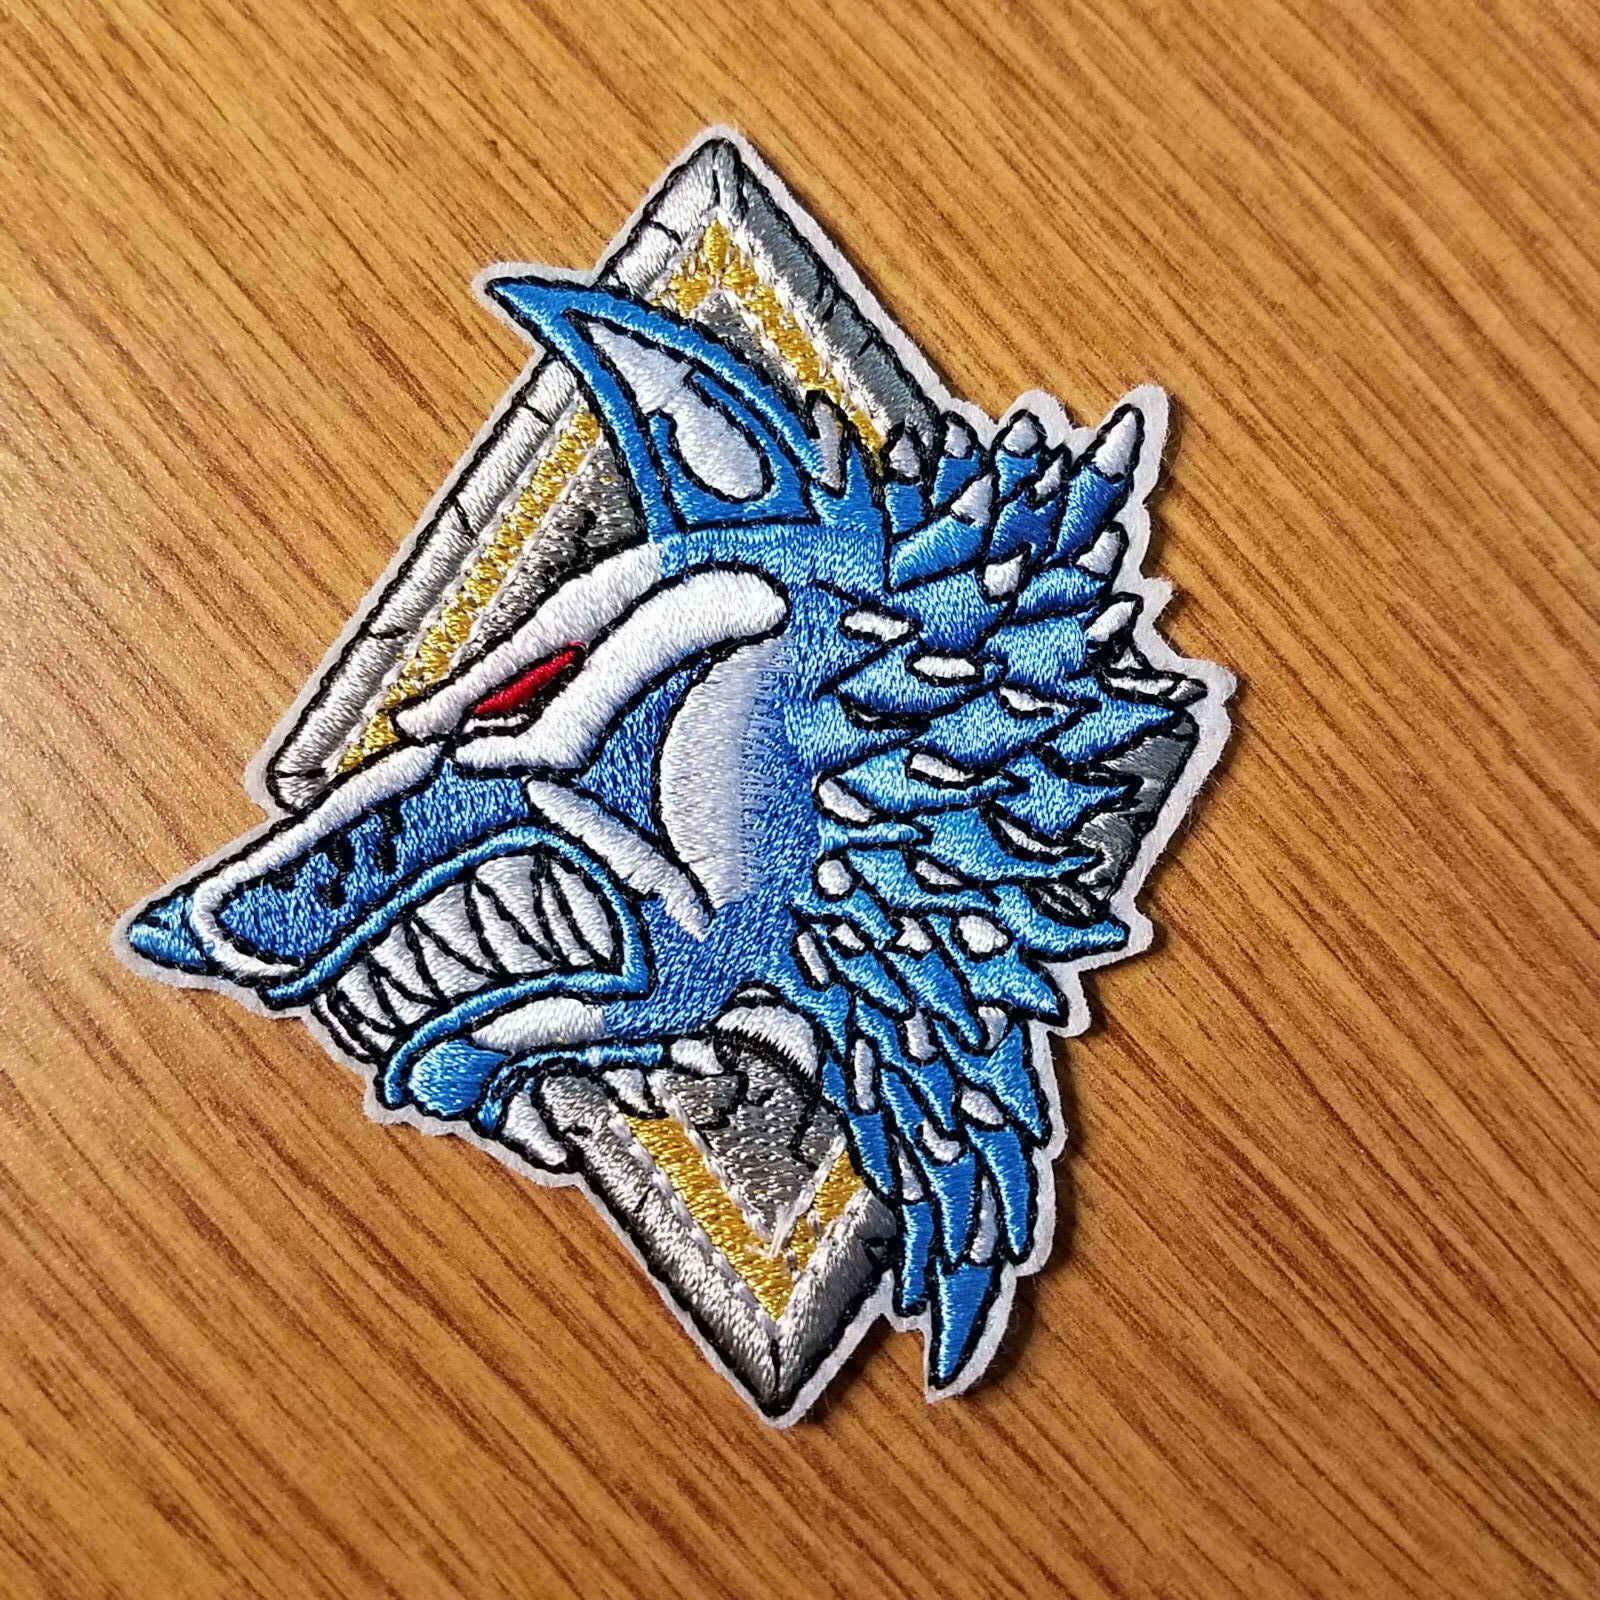 Warhammer 40k Space Wolves Patch 3 1/2 Inches Tall